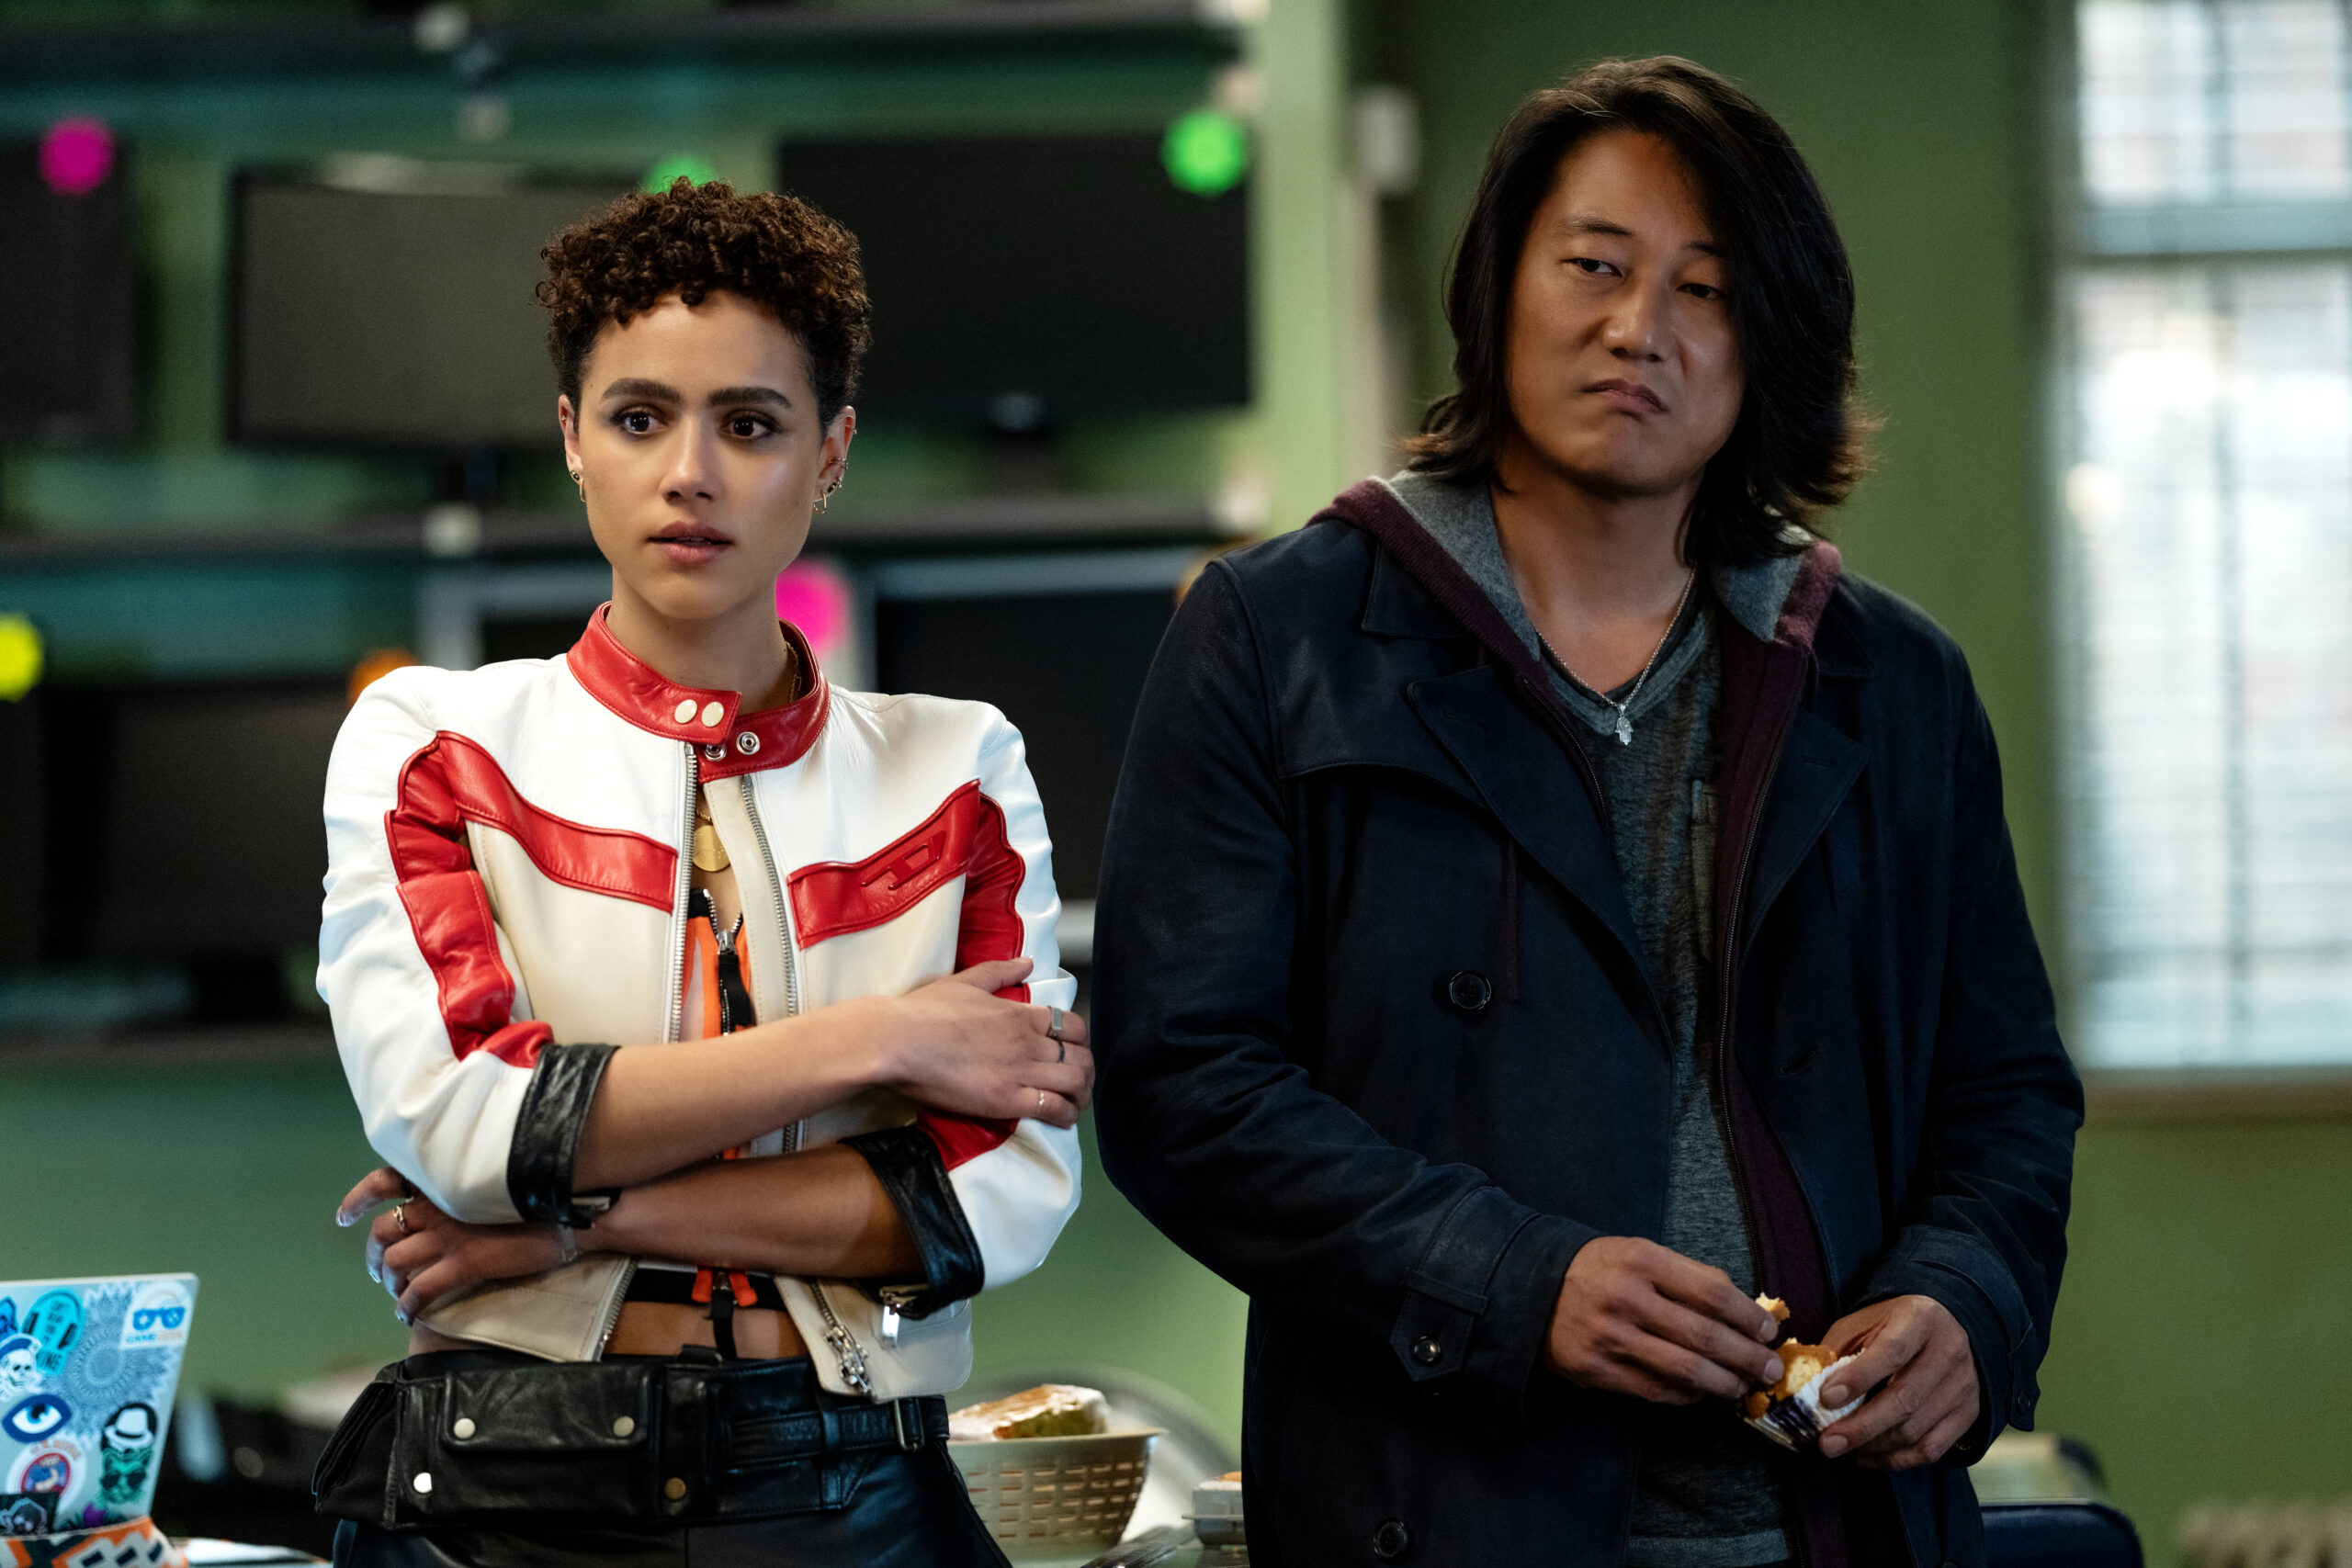 (from left) Ramsey (Nathalie Emmanuel) and Han (Sung Kang) in Fast X, directed by Louis Leterrier.